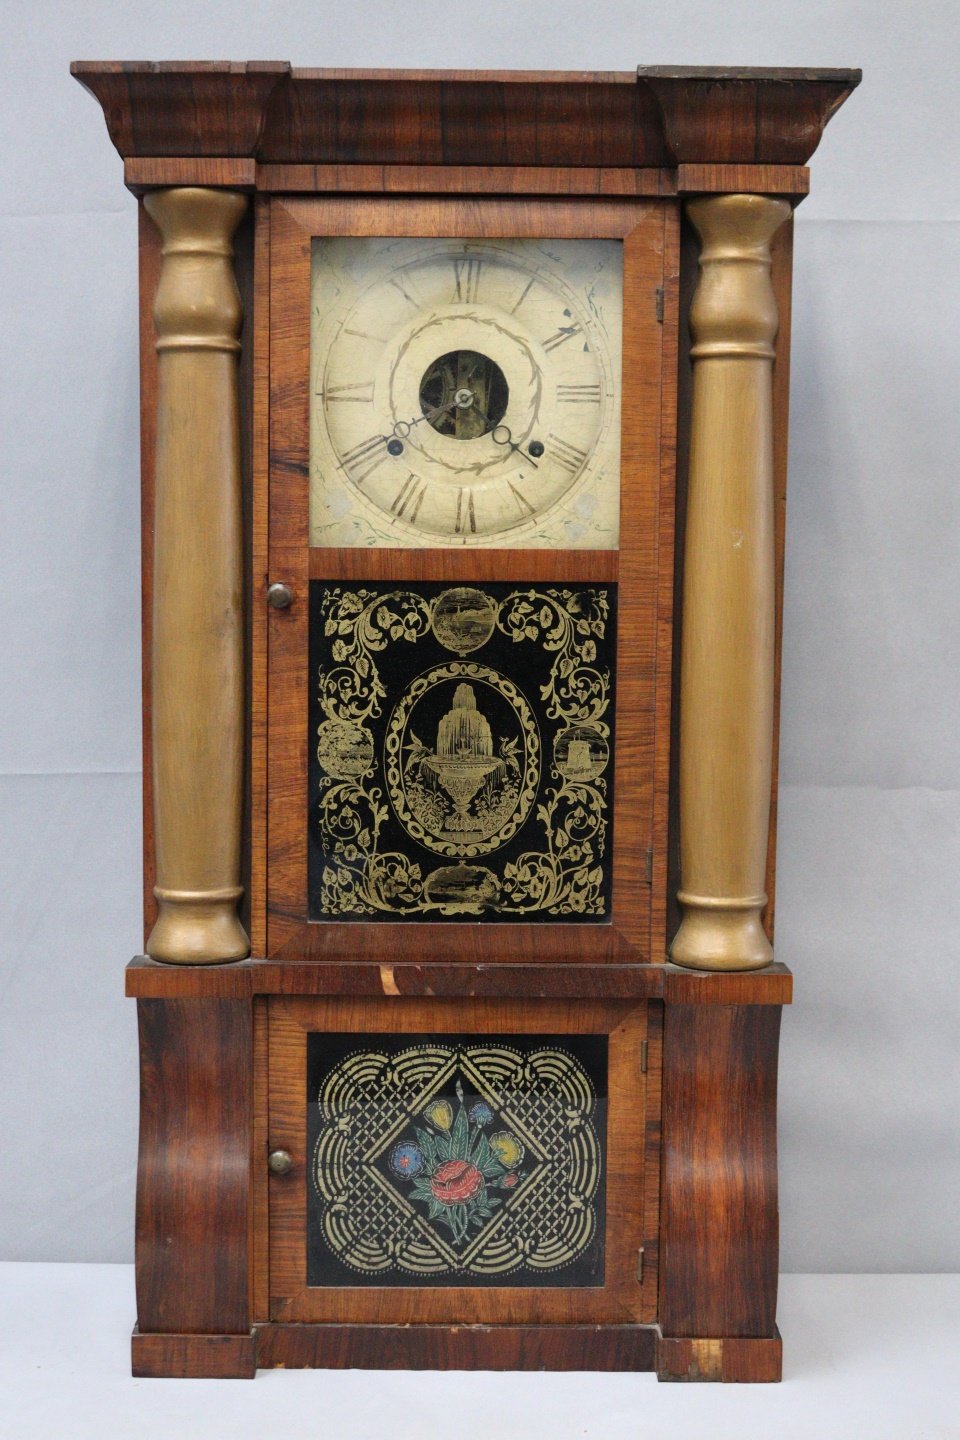 AN ANTIQUE WOOD CASED CLOCK WITH